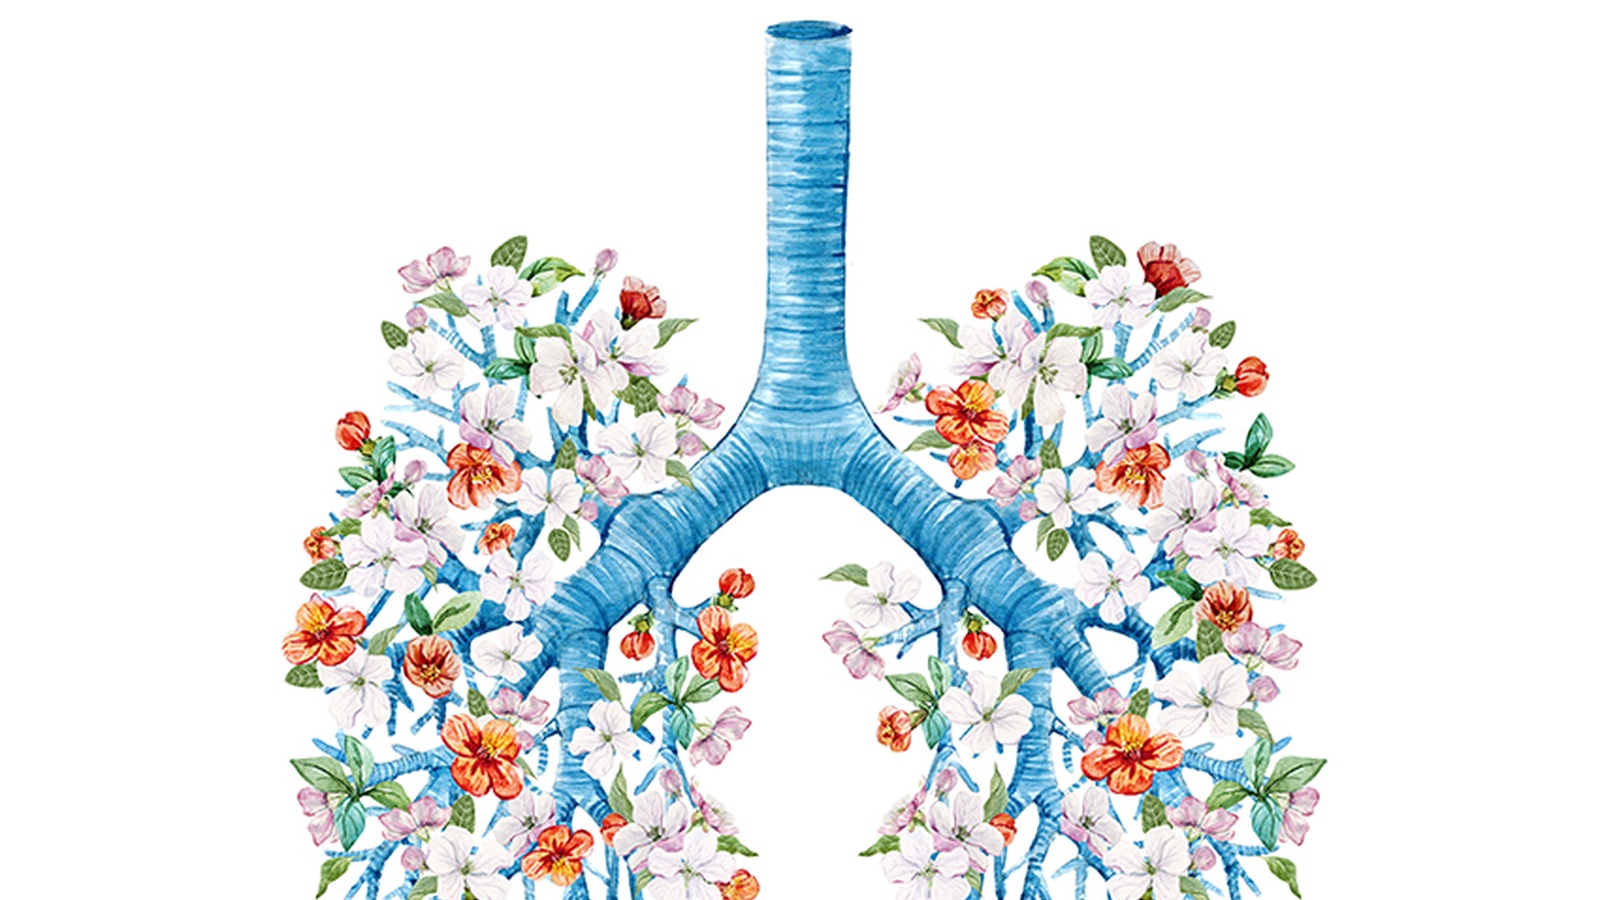 13 Ways To Improve Your Lung Health According To Chinese Medicine